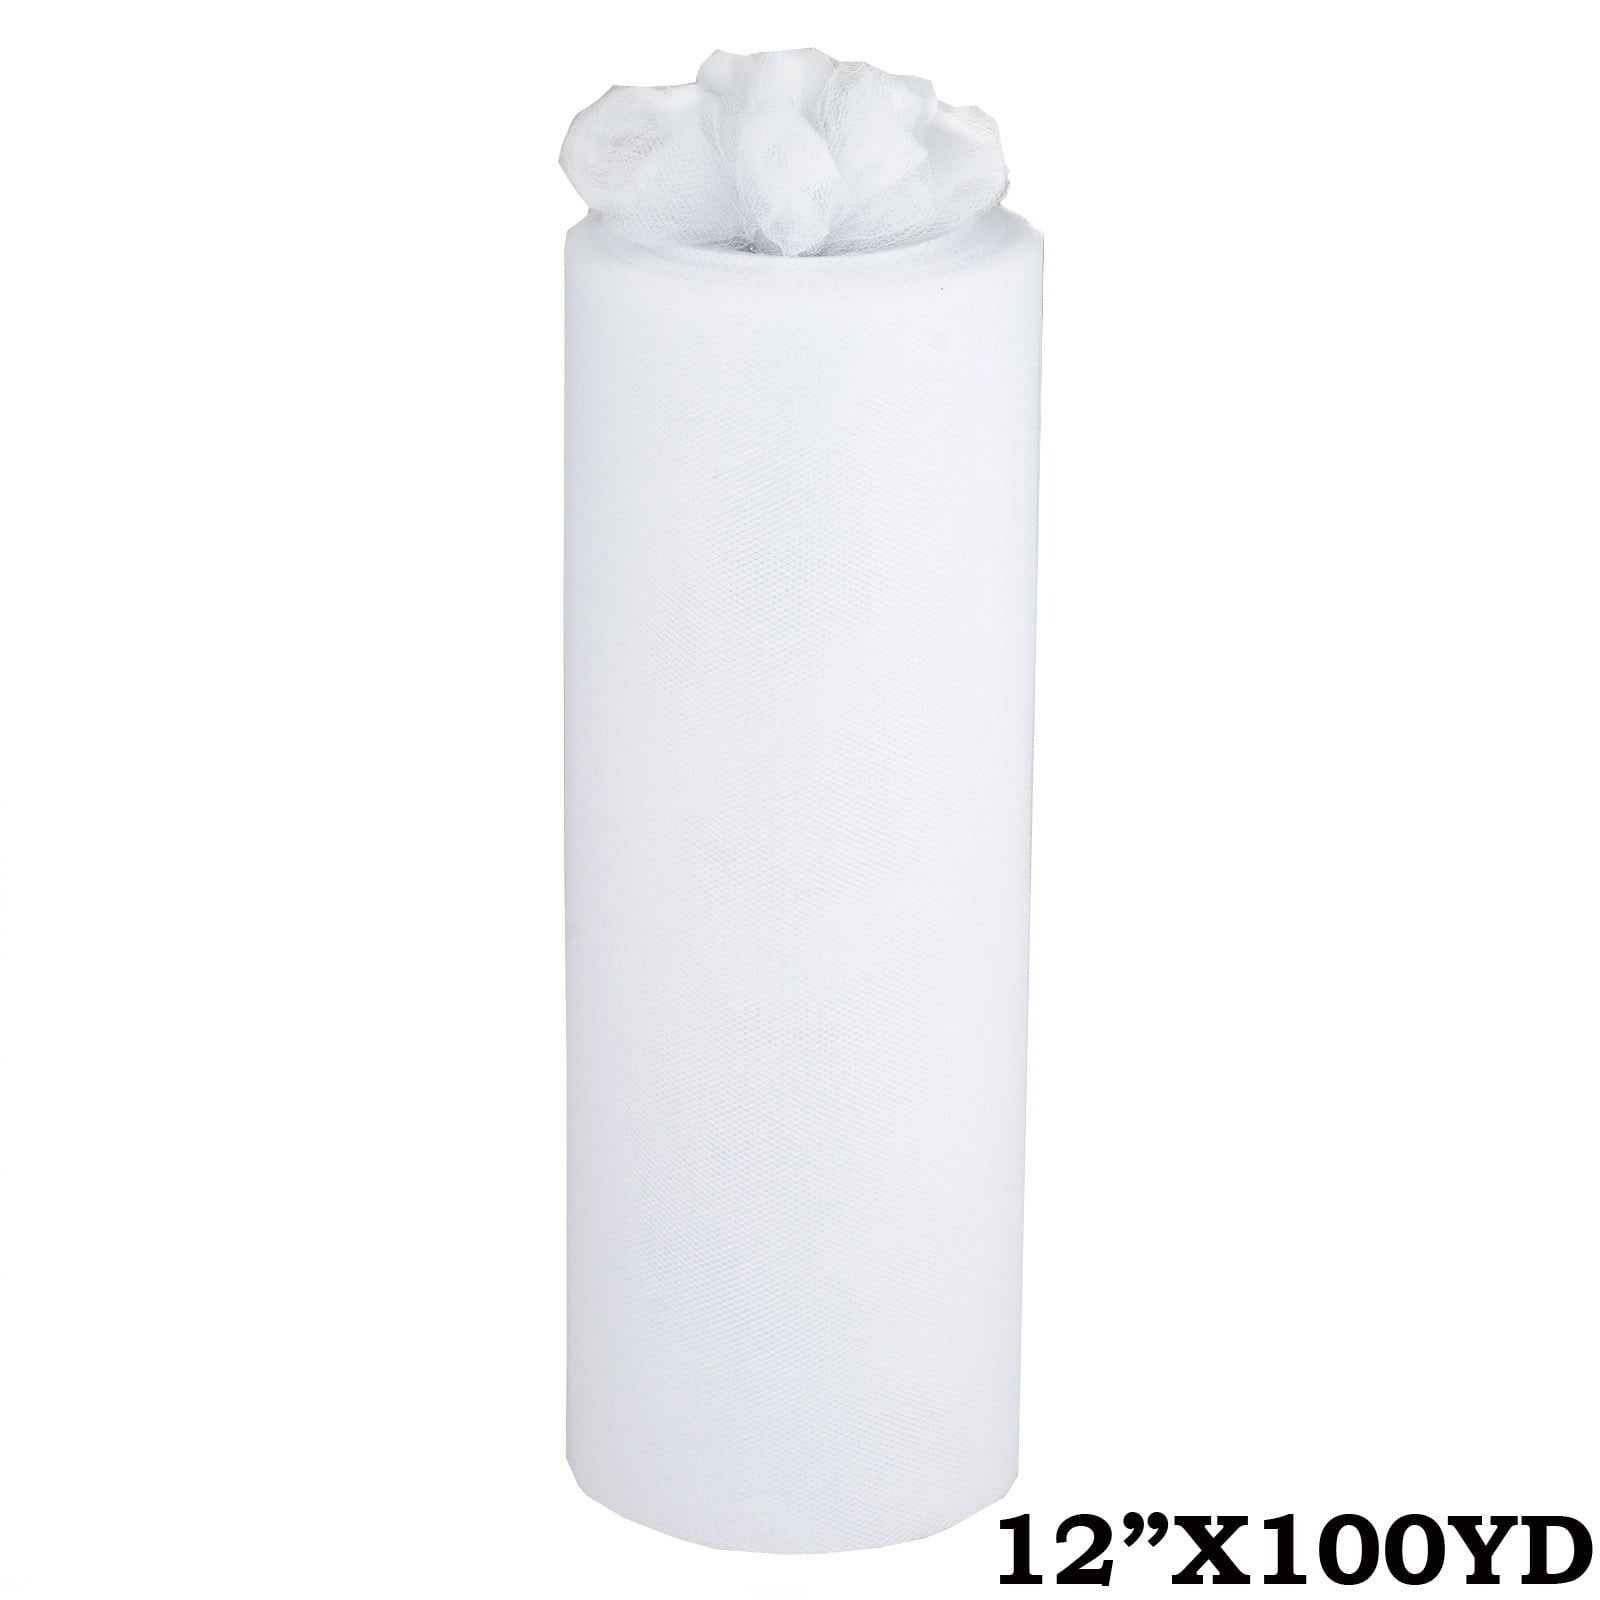 White WEDDING TULLE 12" x 100 yards ROLL DIY Party Favors Pew Bows Crafts Sew 